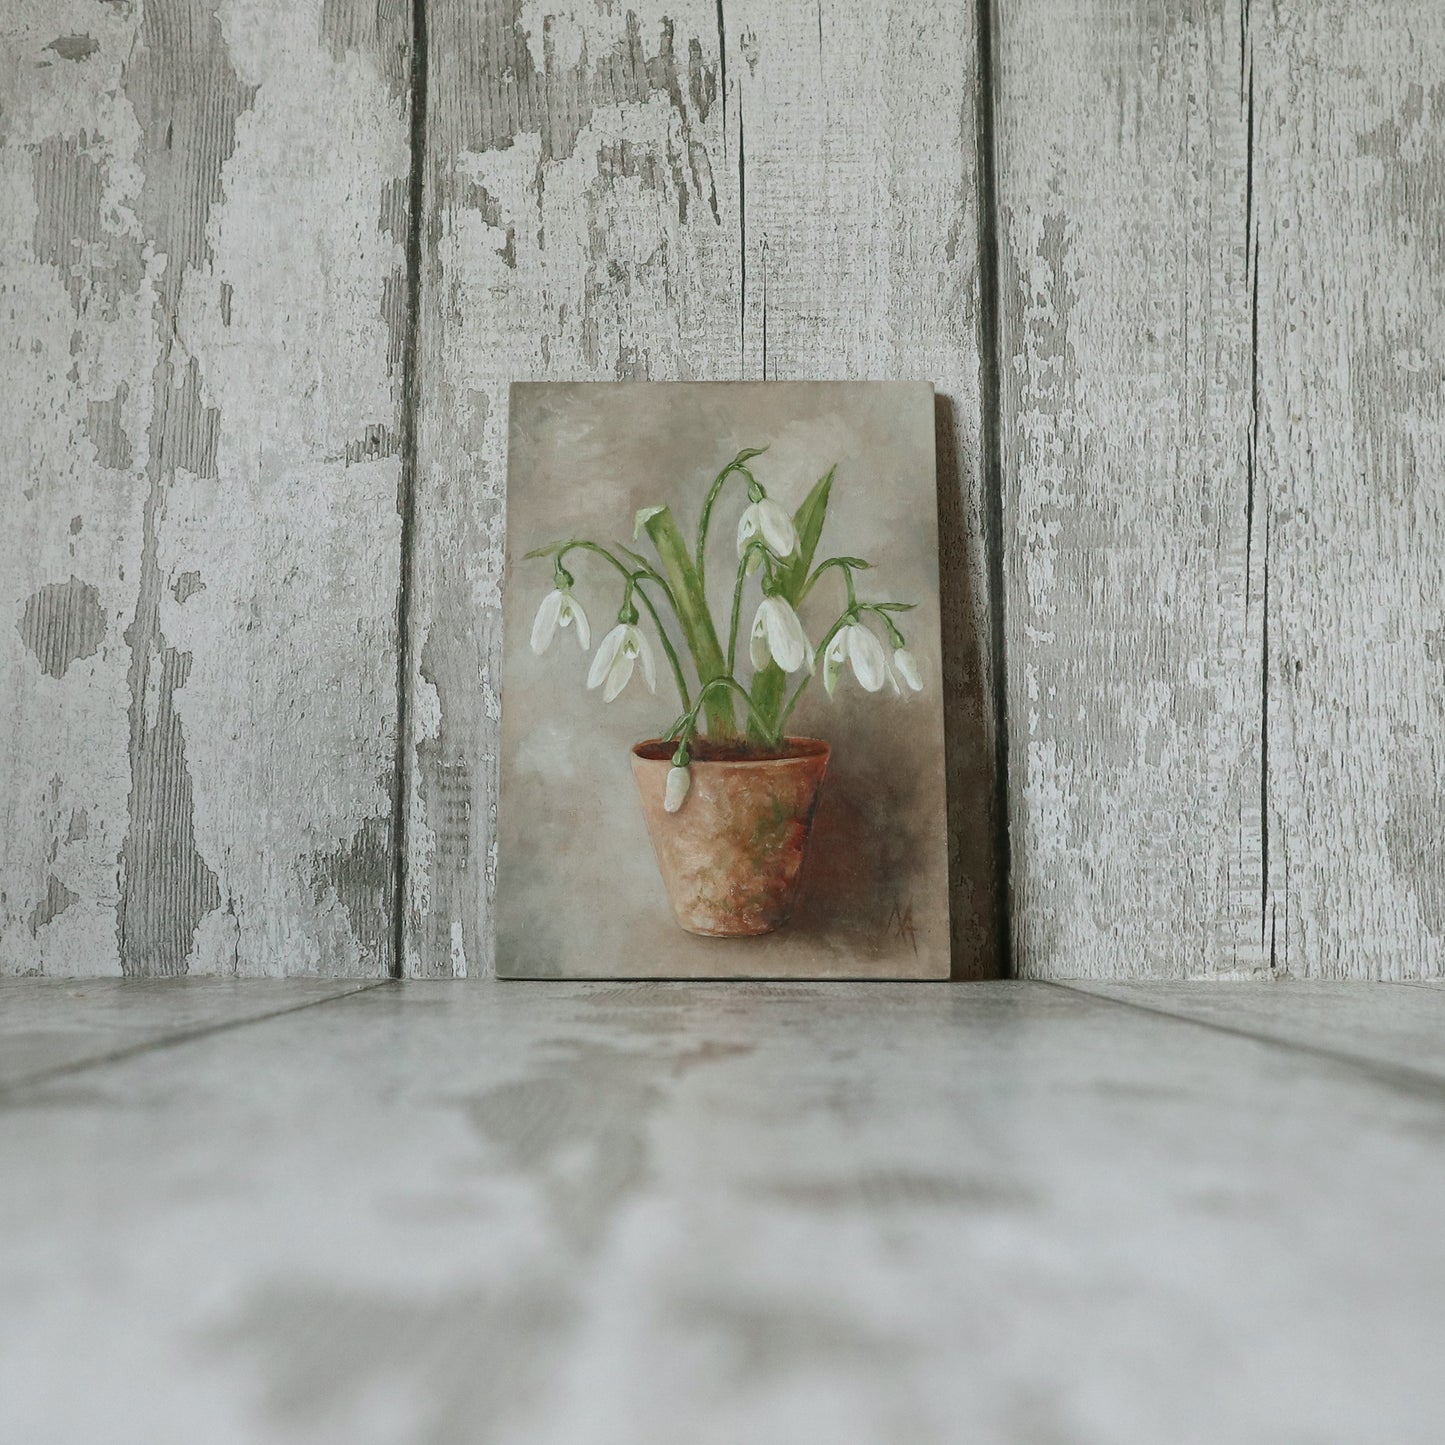 Original Oil Painting From The Potted Floral Collection 'Snowdrops' (un-framed)